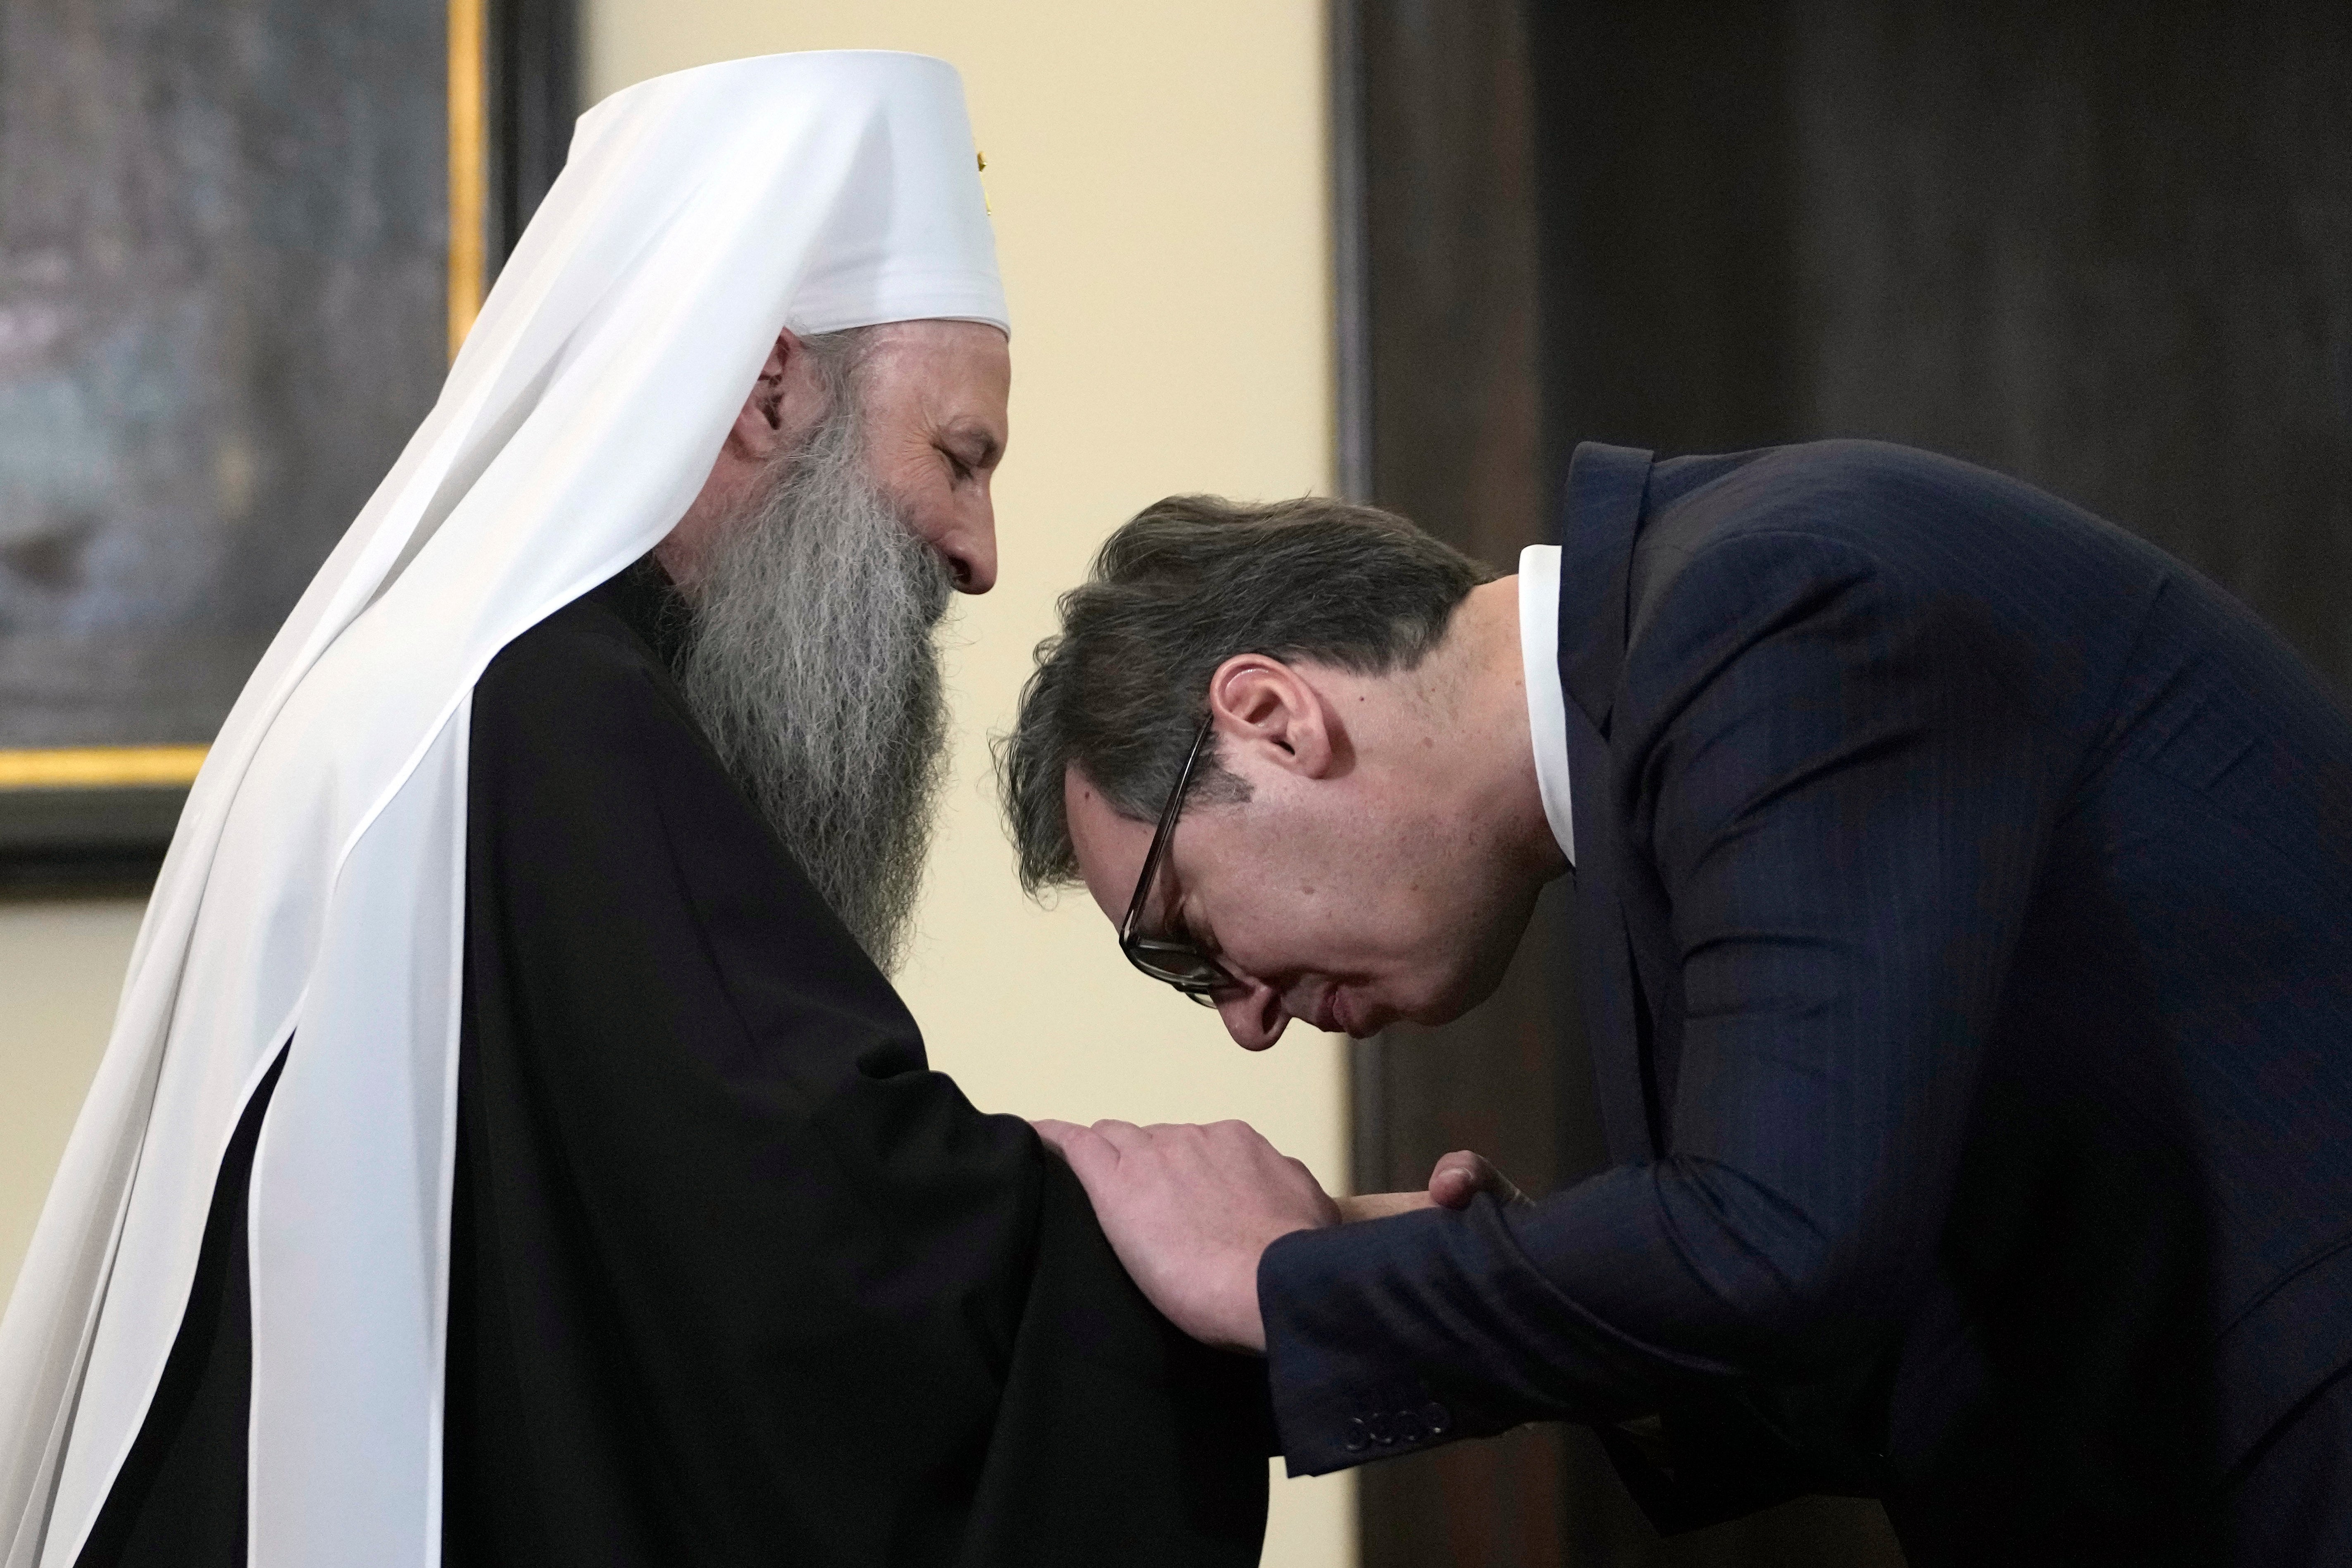 Serbian president Aleksandar Vucic kisses the hand of Serbian Orthodox Church Patriarch Porfirije on Tuesday after a news conference in Belgrade